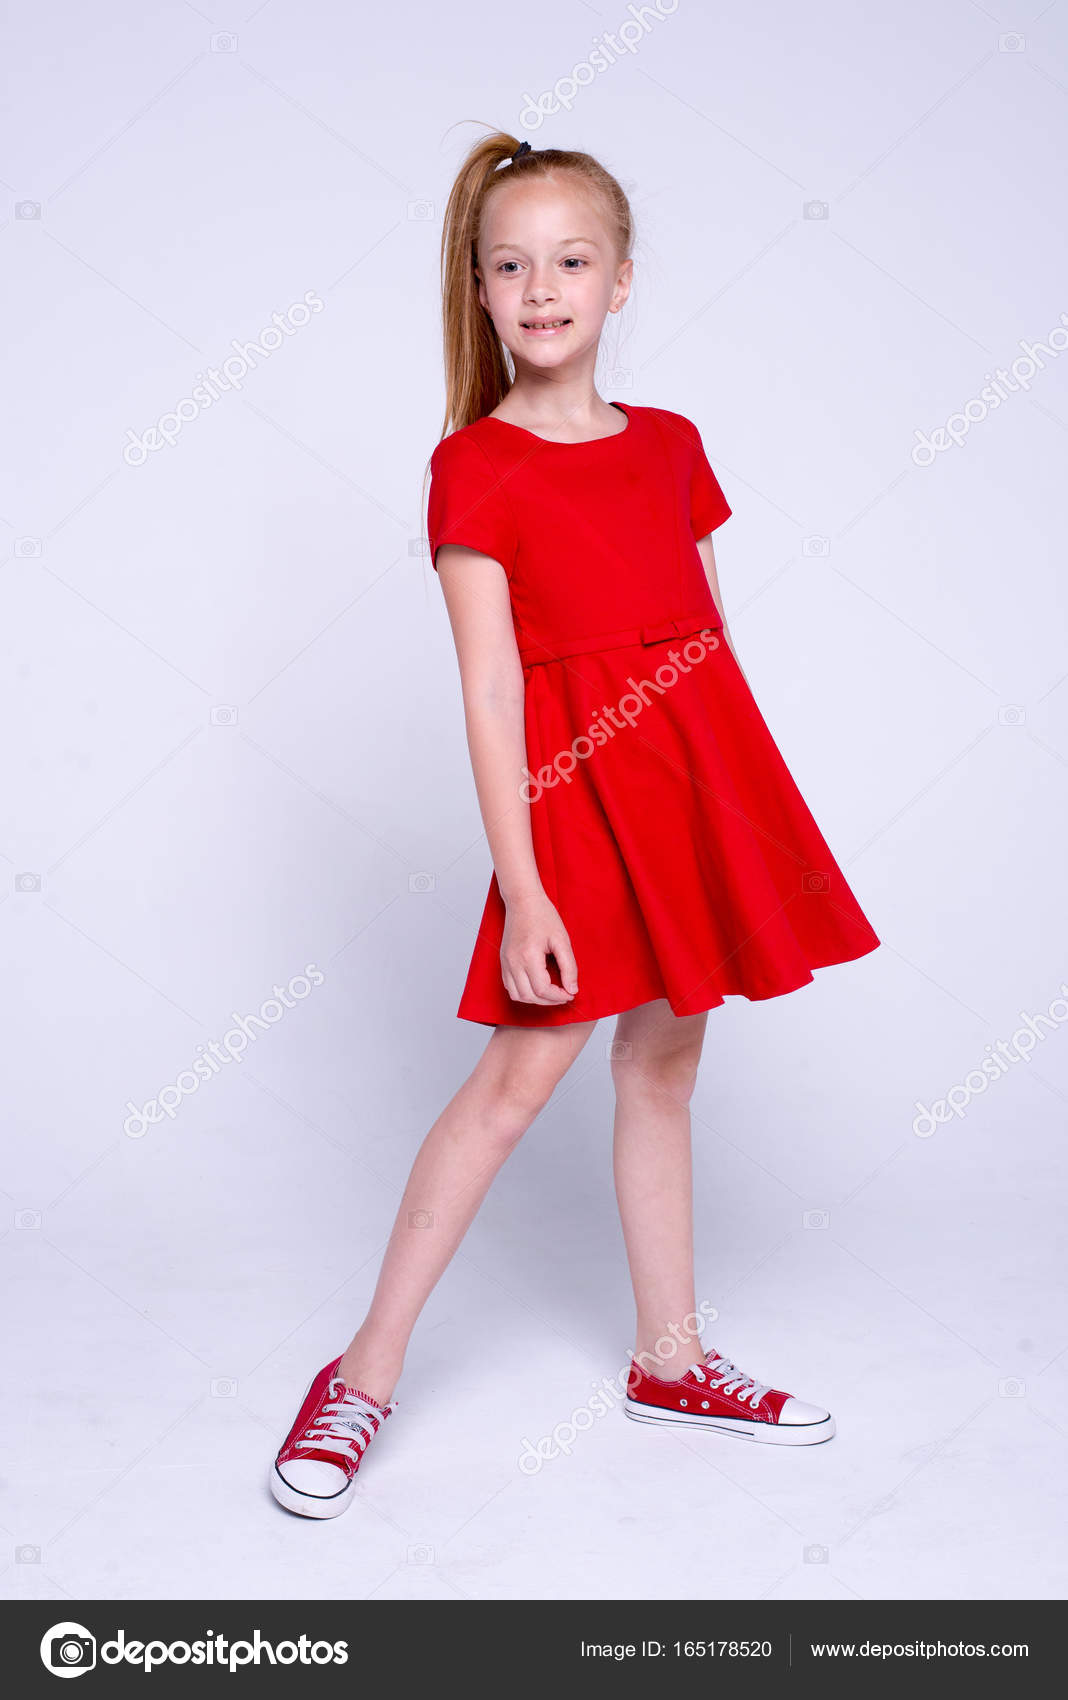 red dress sneakers